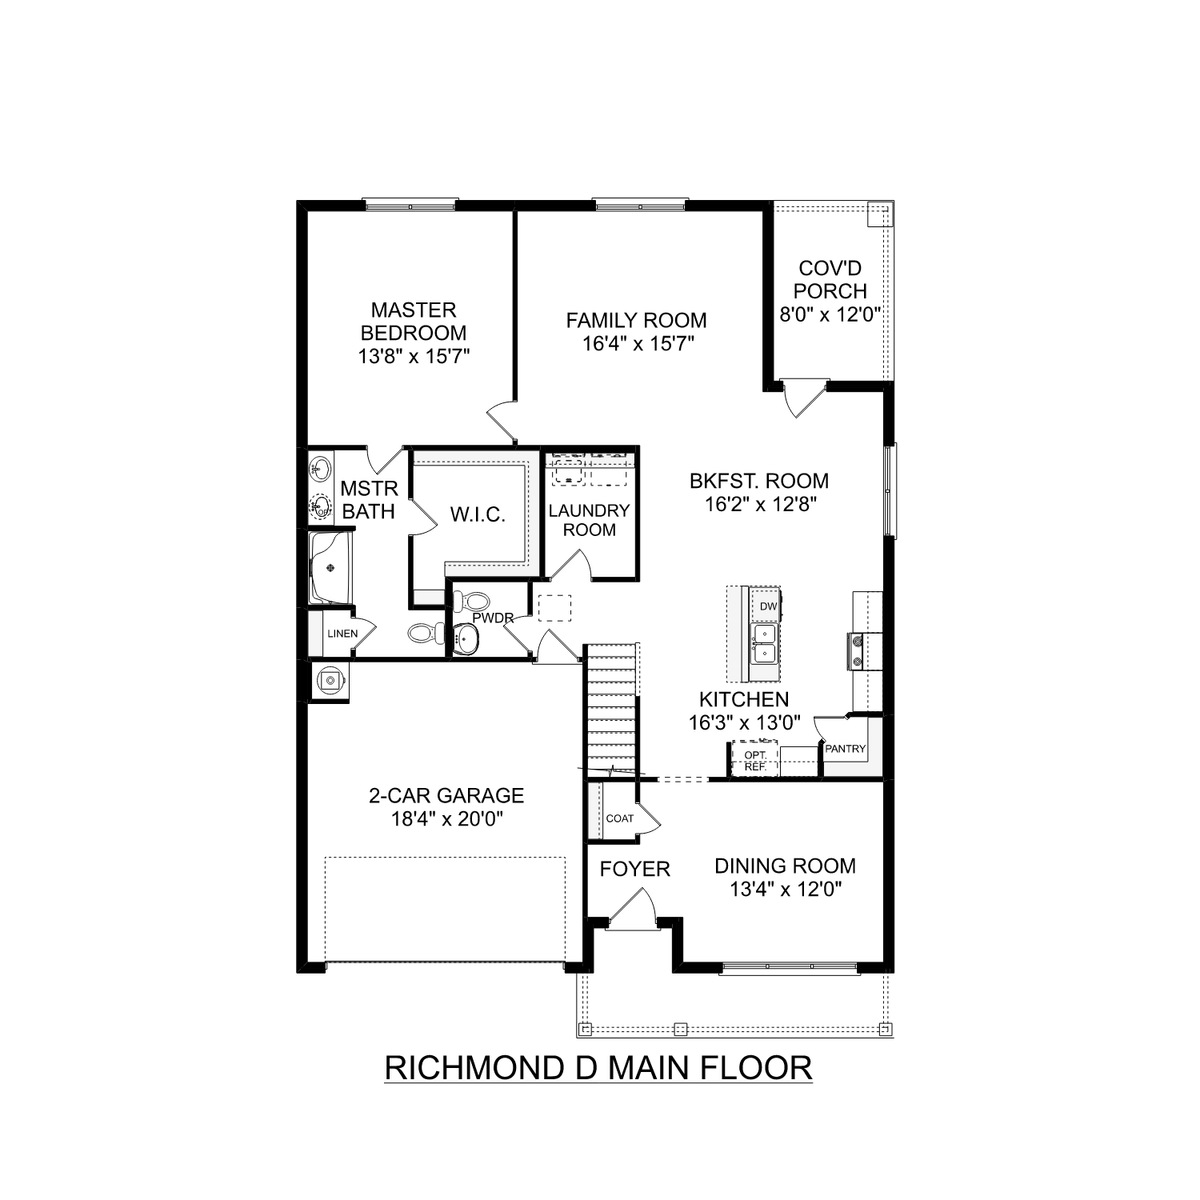 1 - The Richmond D buildable floor plan layout in Davidson Homes' The Meadows community.